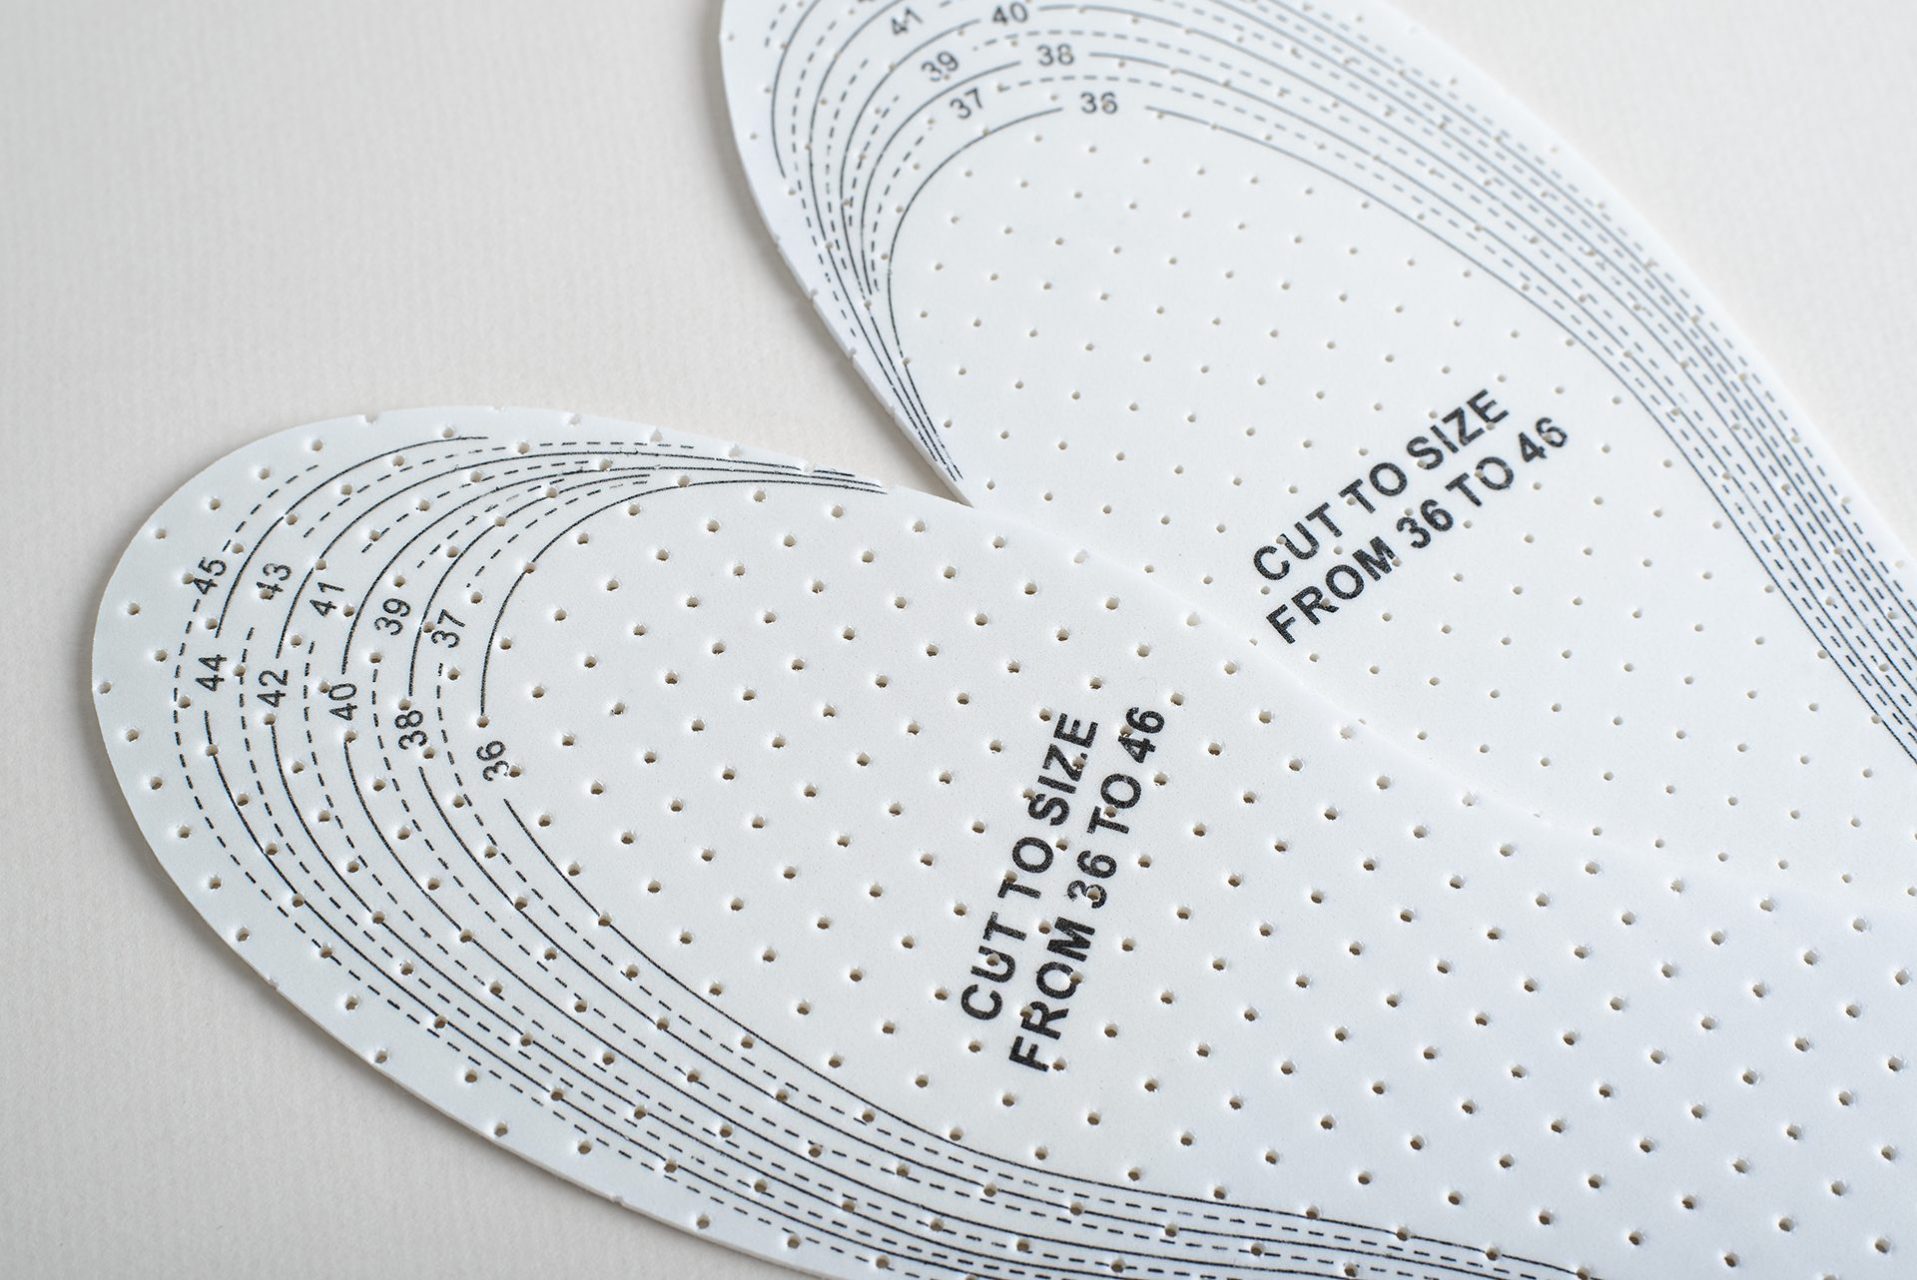 where to buy textured insoles in Singapore